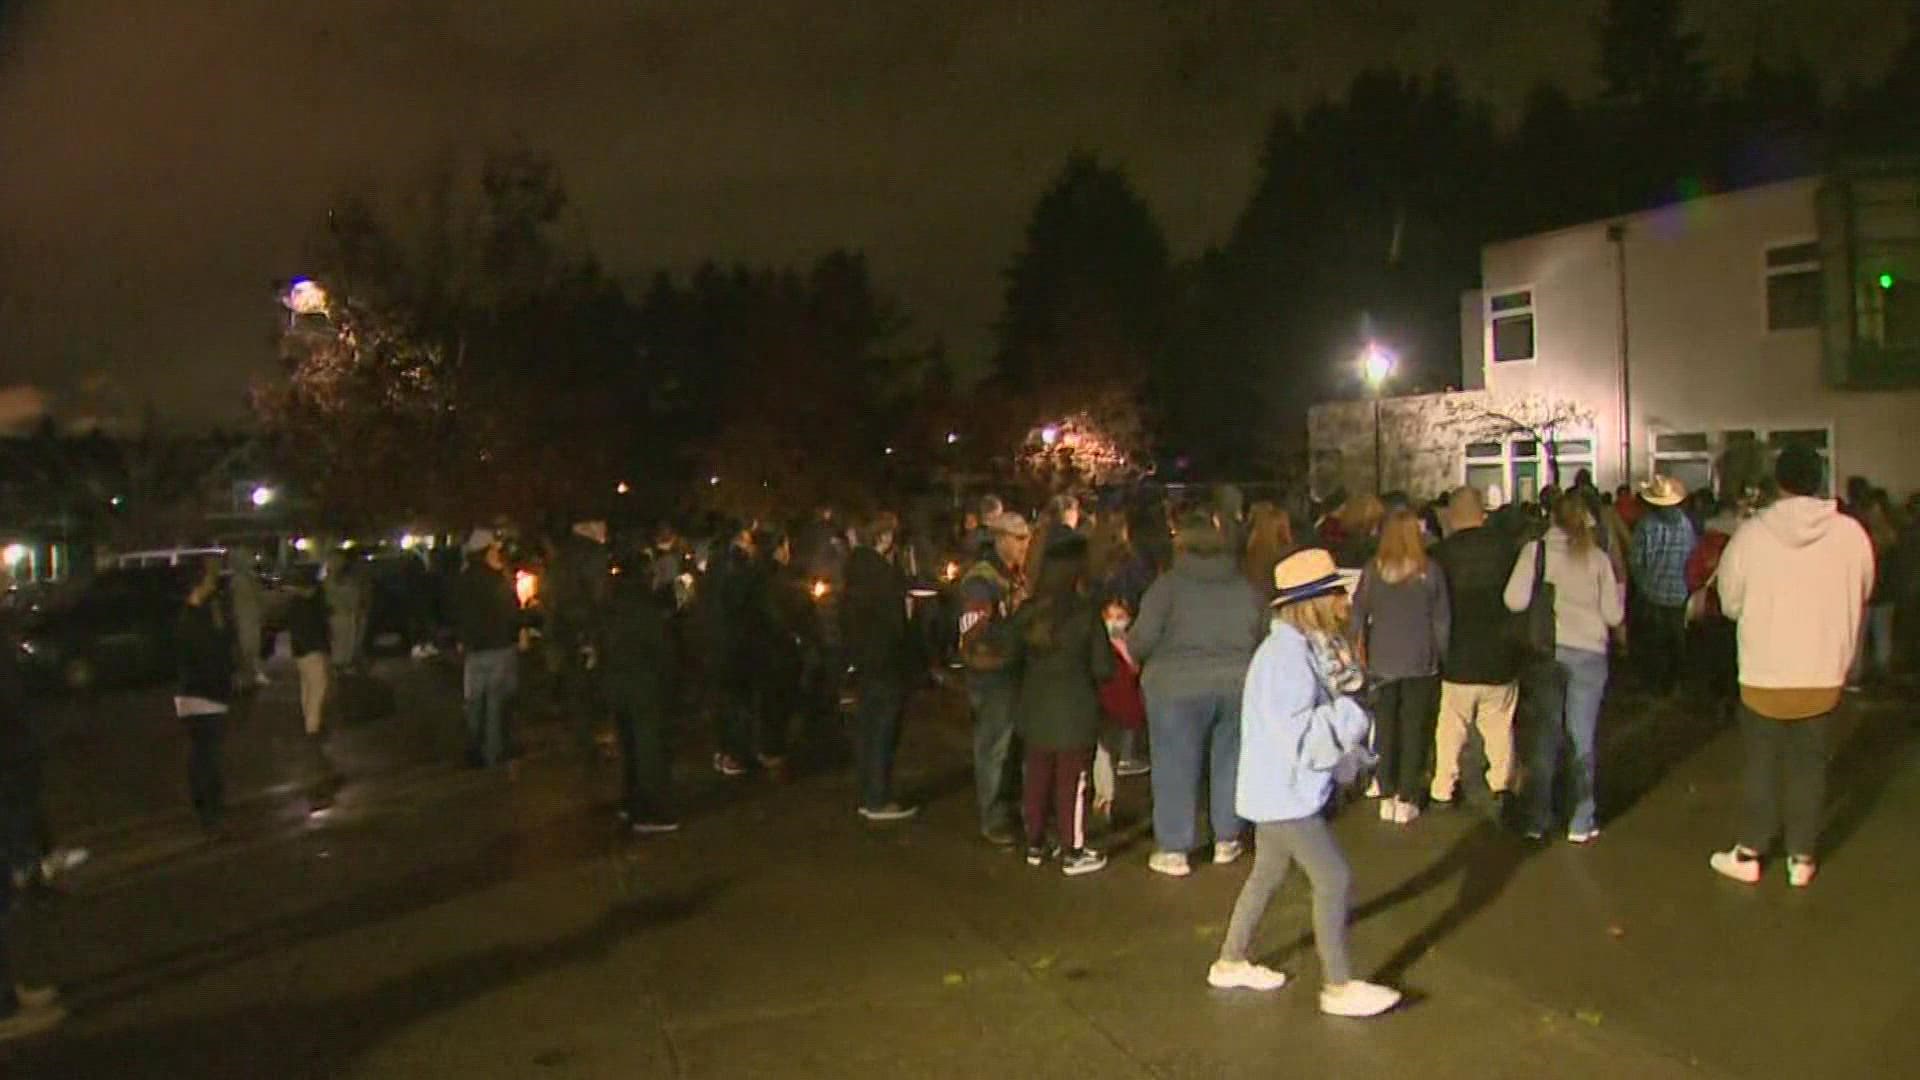 The vigil drew dozens of people to Lister Elementary School, where the remembrance was held.